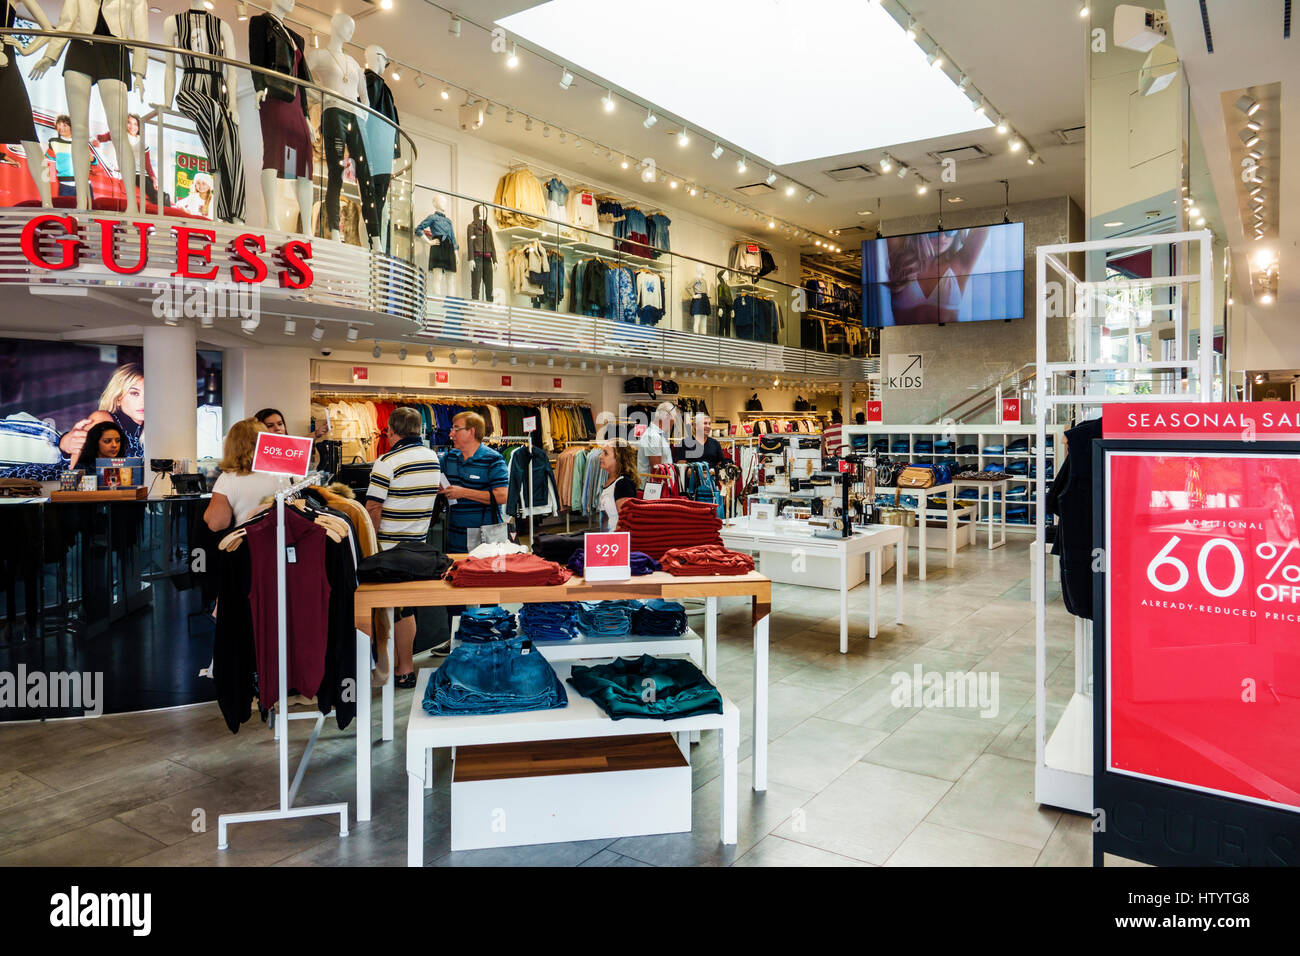 Guess clothing shop interior hi-res stock photography and images - Alamy